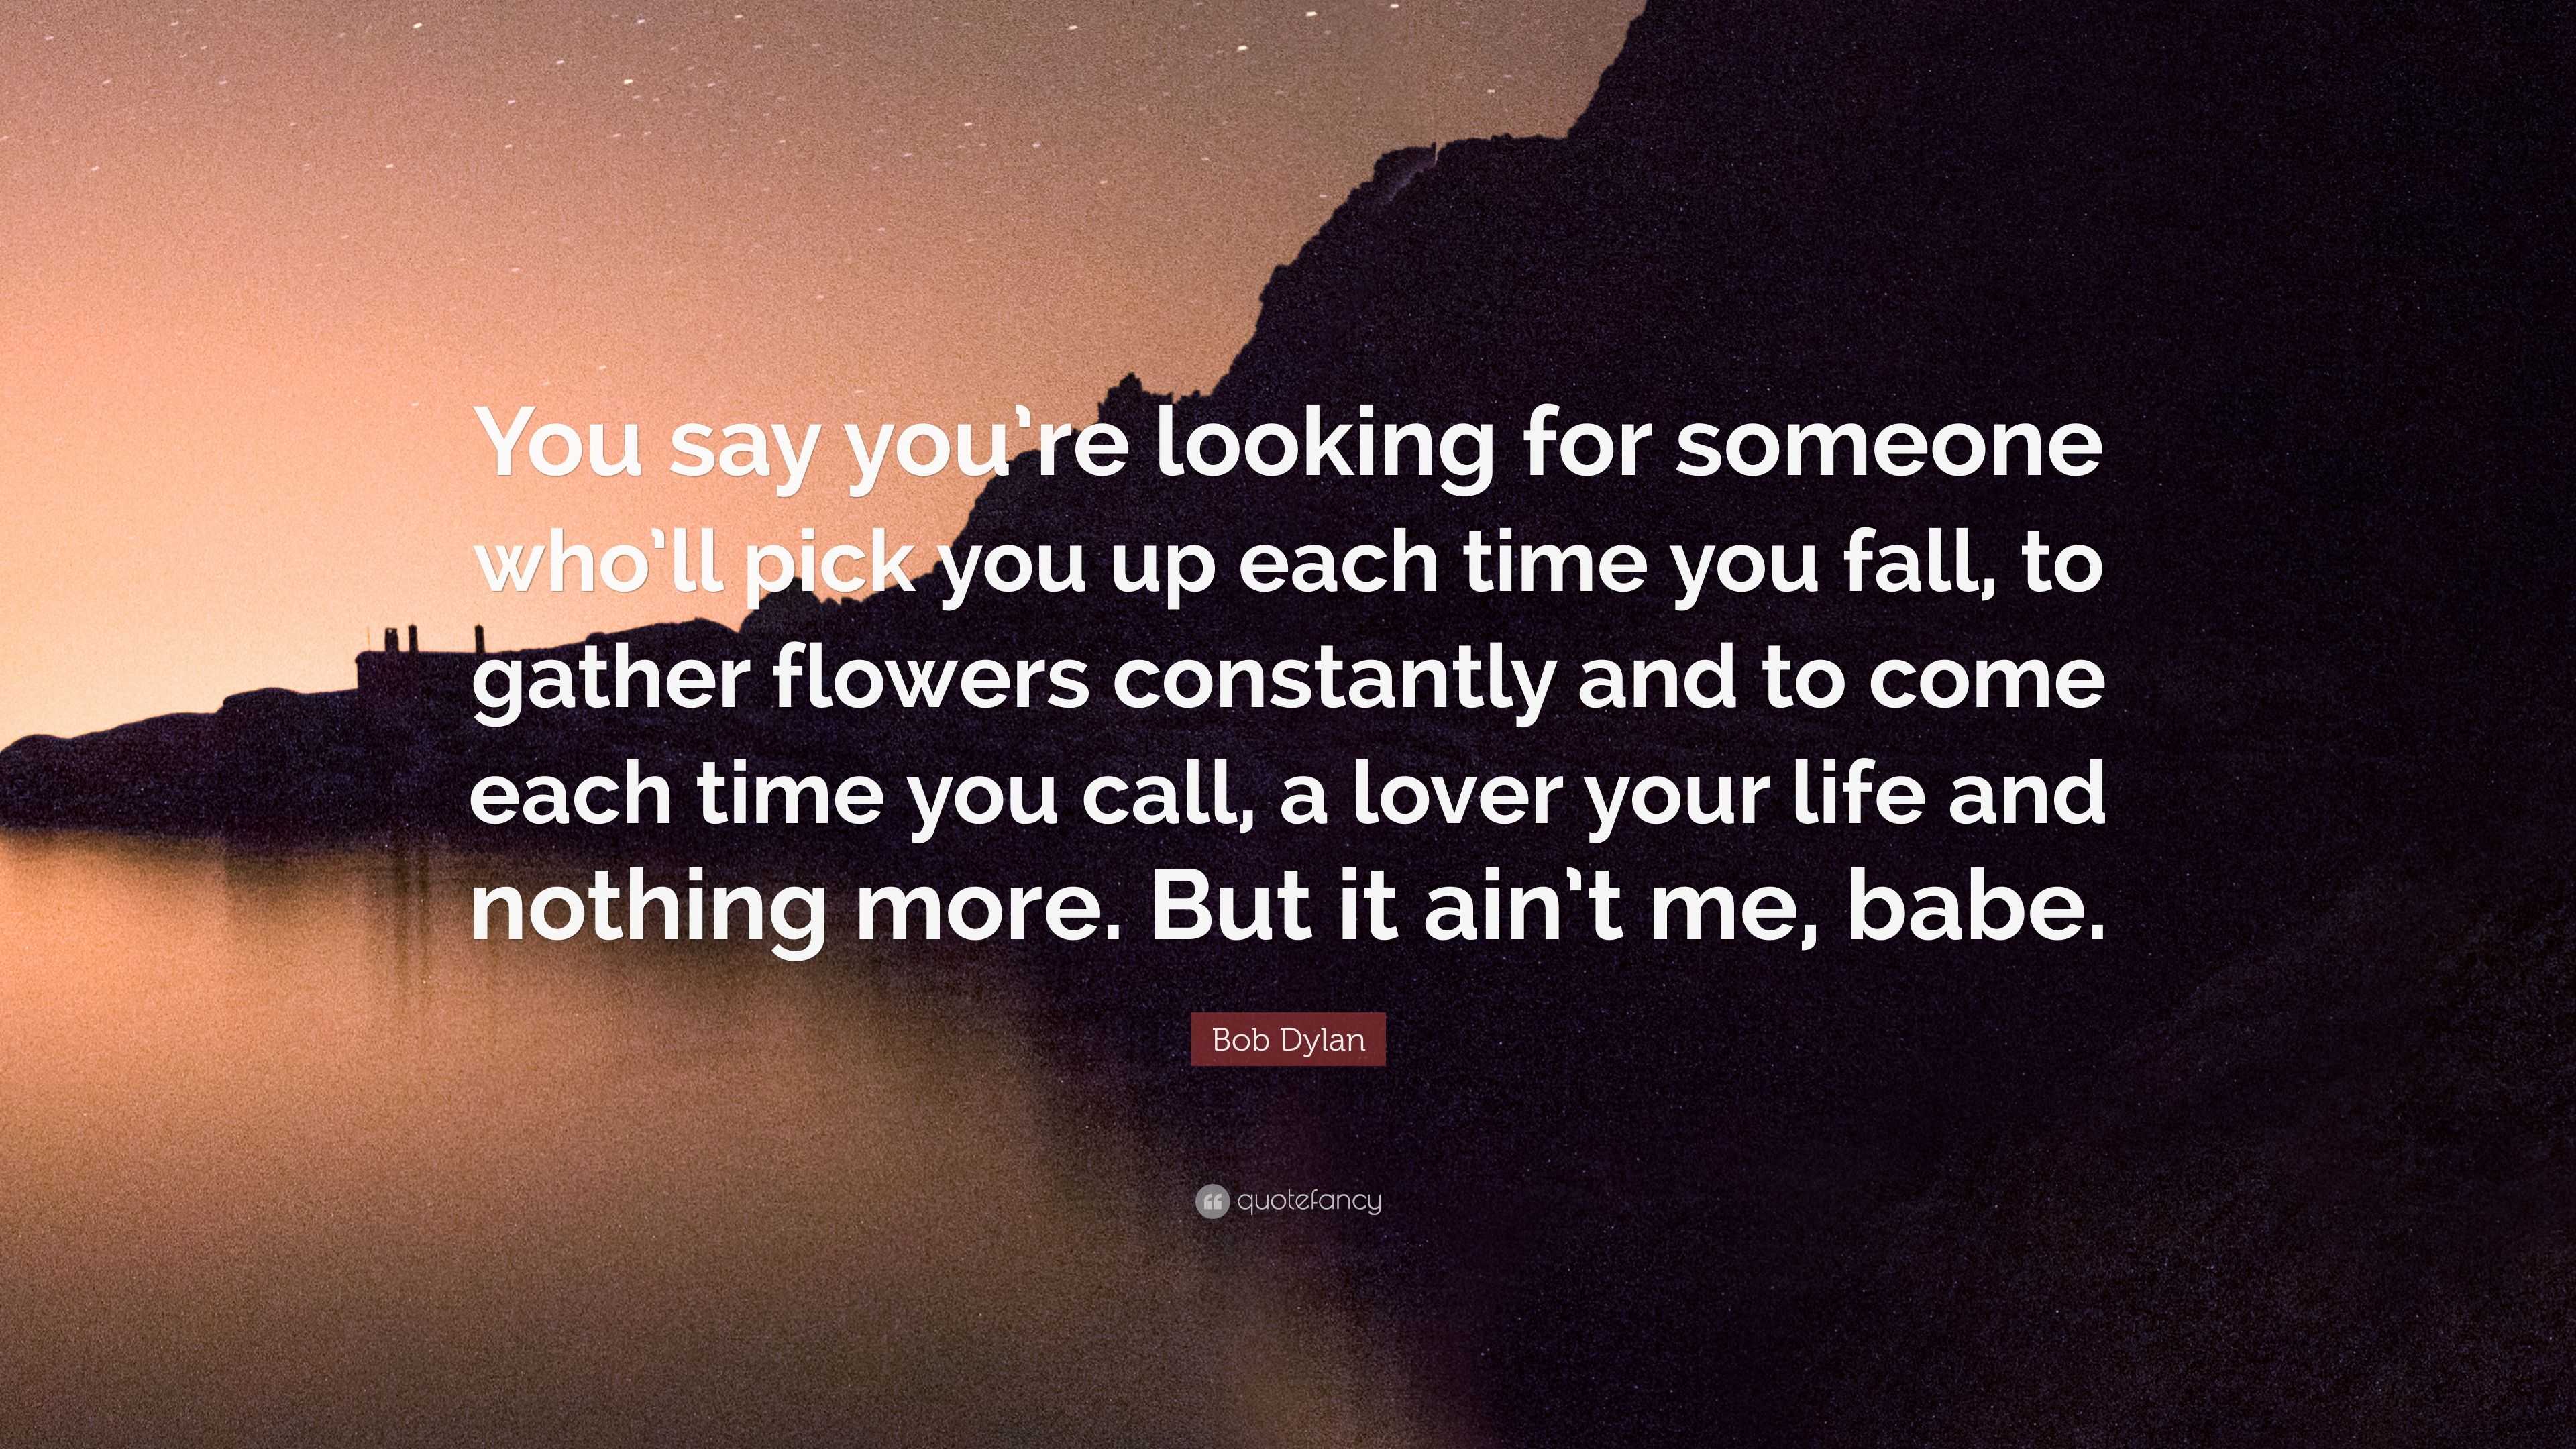 Bob Dylan Quote “You say you re looking for someone who ll